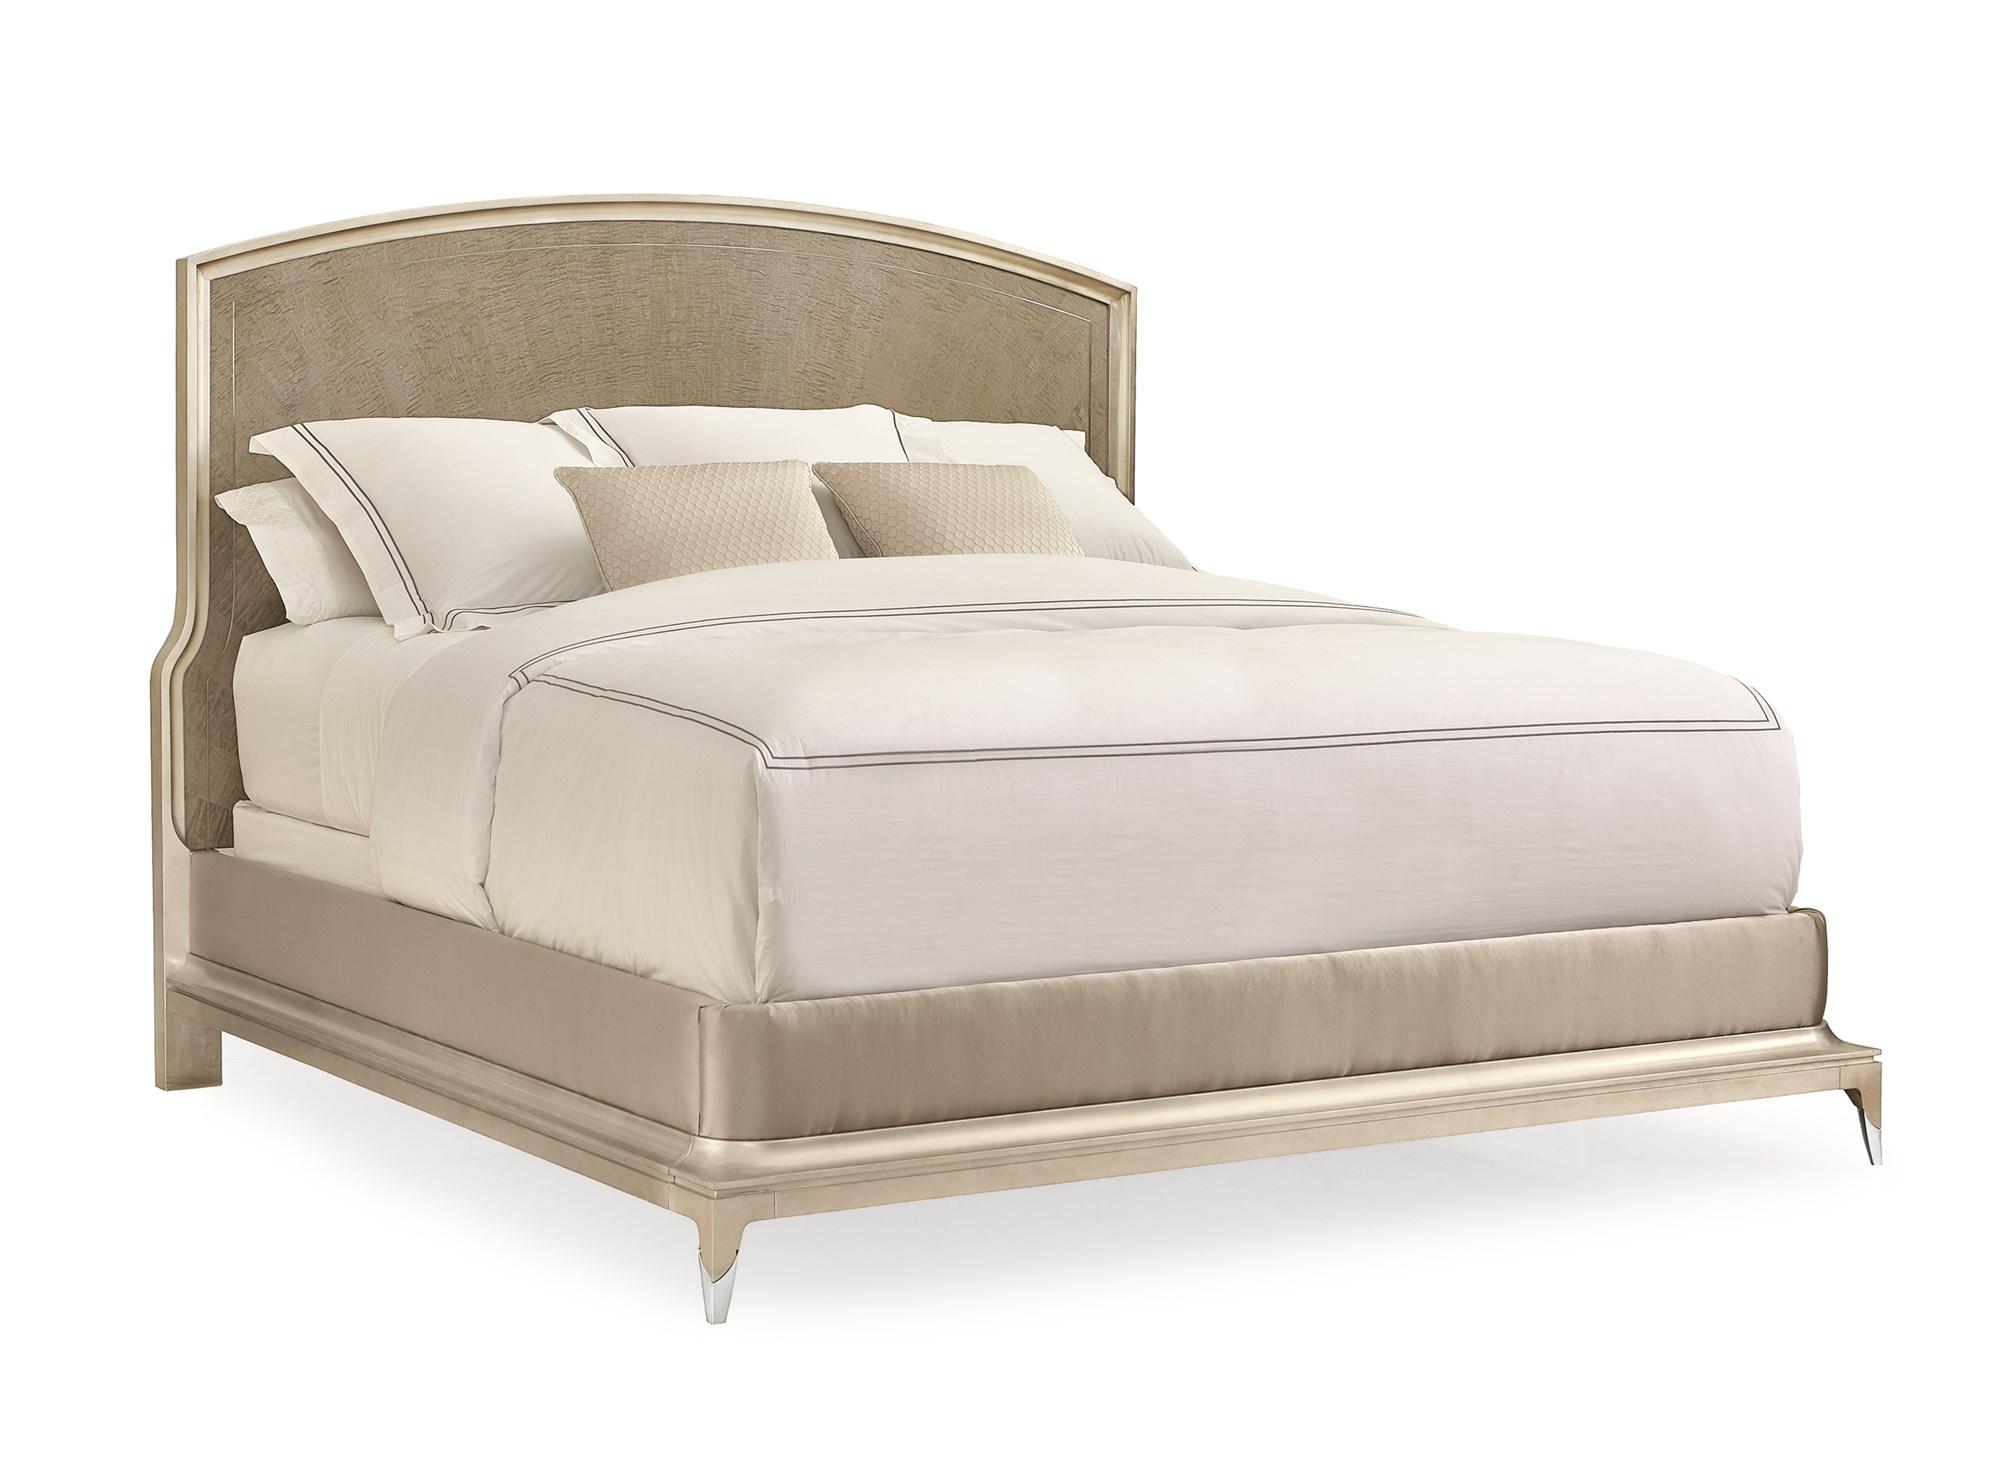 Contemporary Platform Bed RISE TO THE OCCASION CLA-417-125 in Silver, Beige 